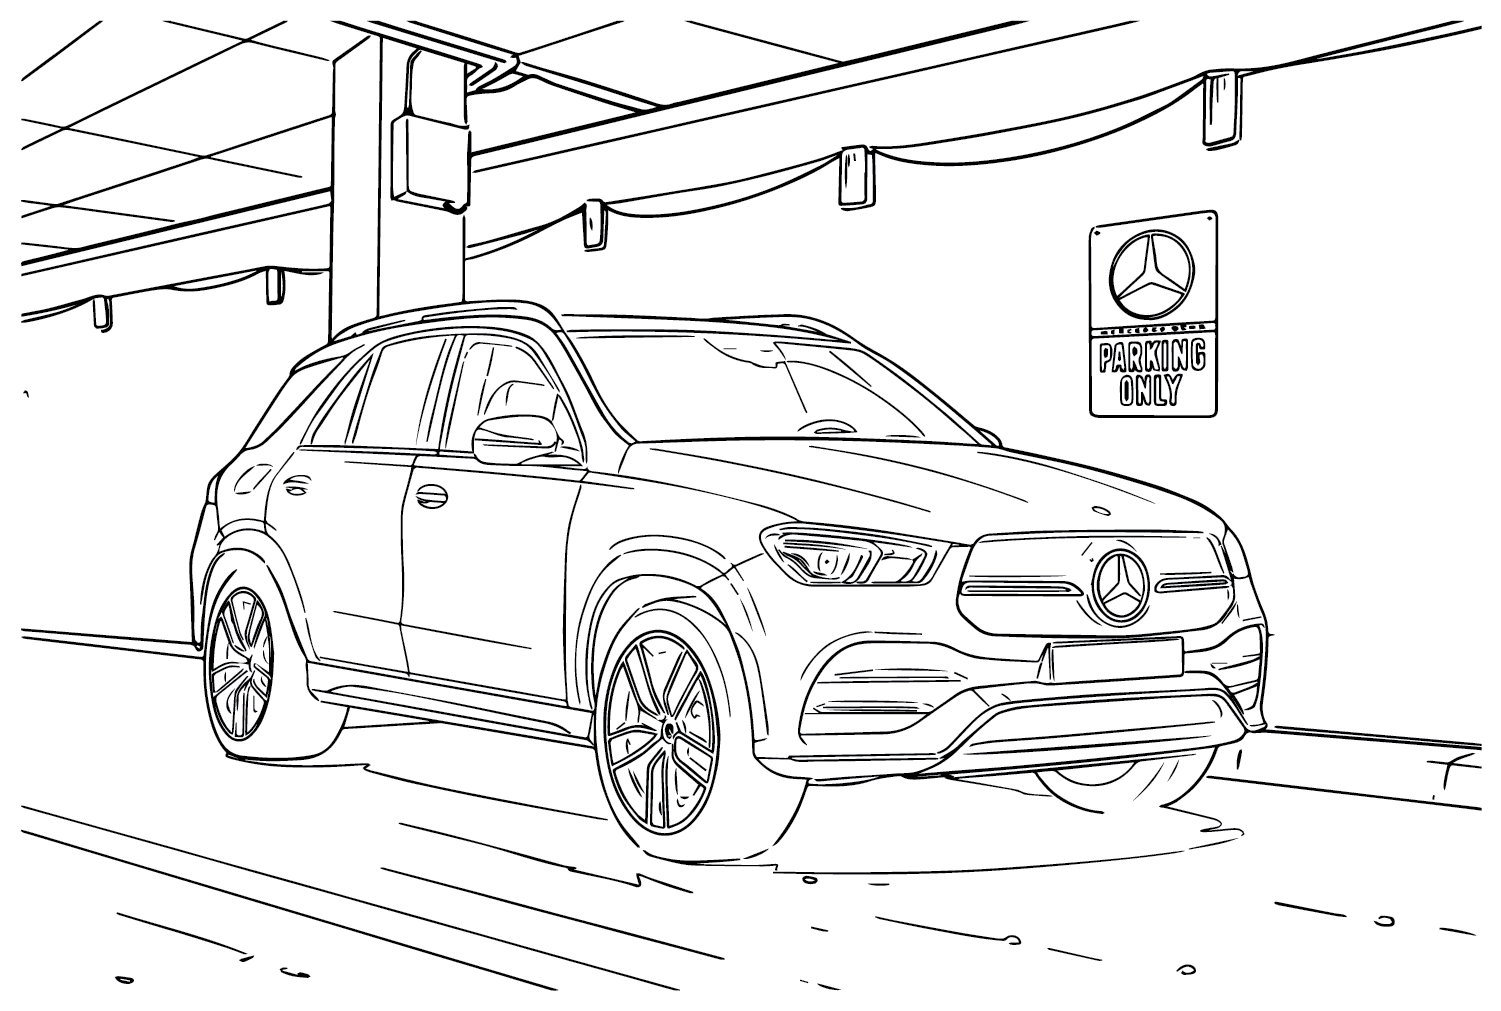 Mercedes-Benz GLE Coloring Page from Mercedes-Benz